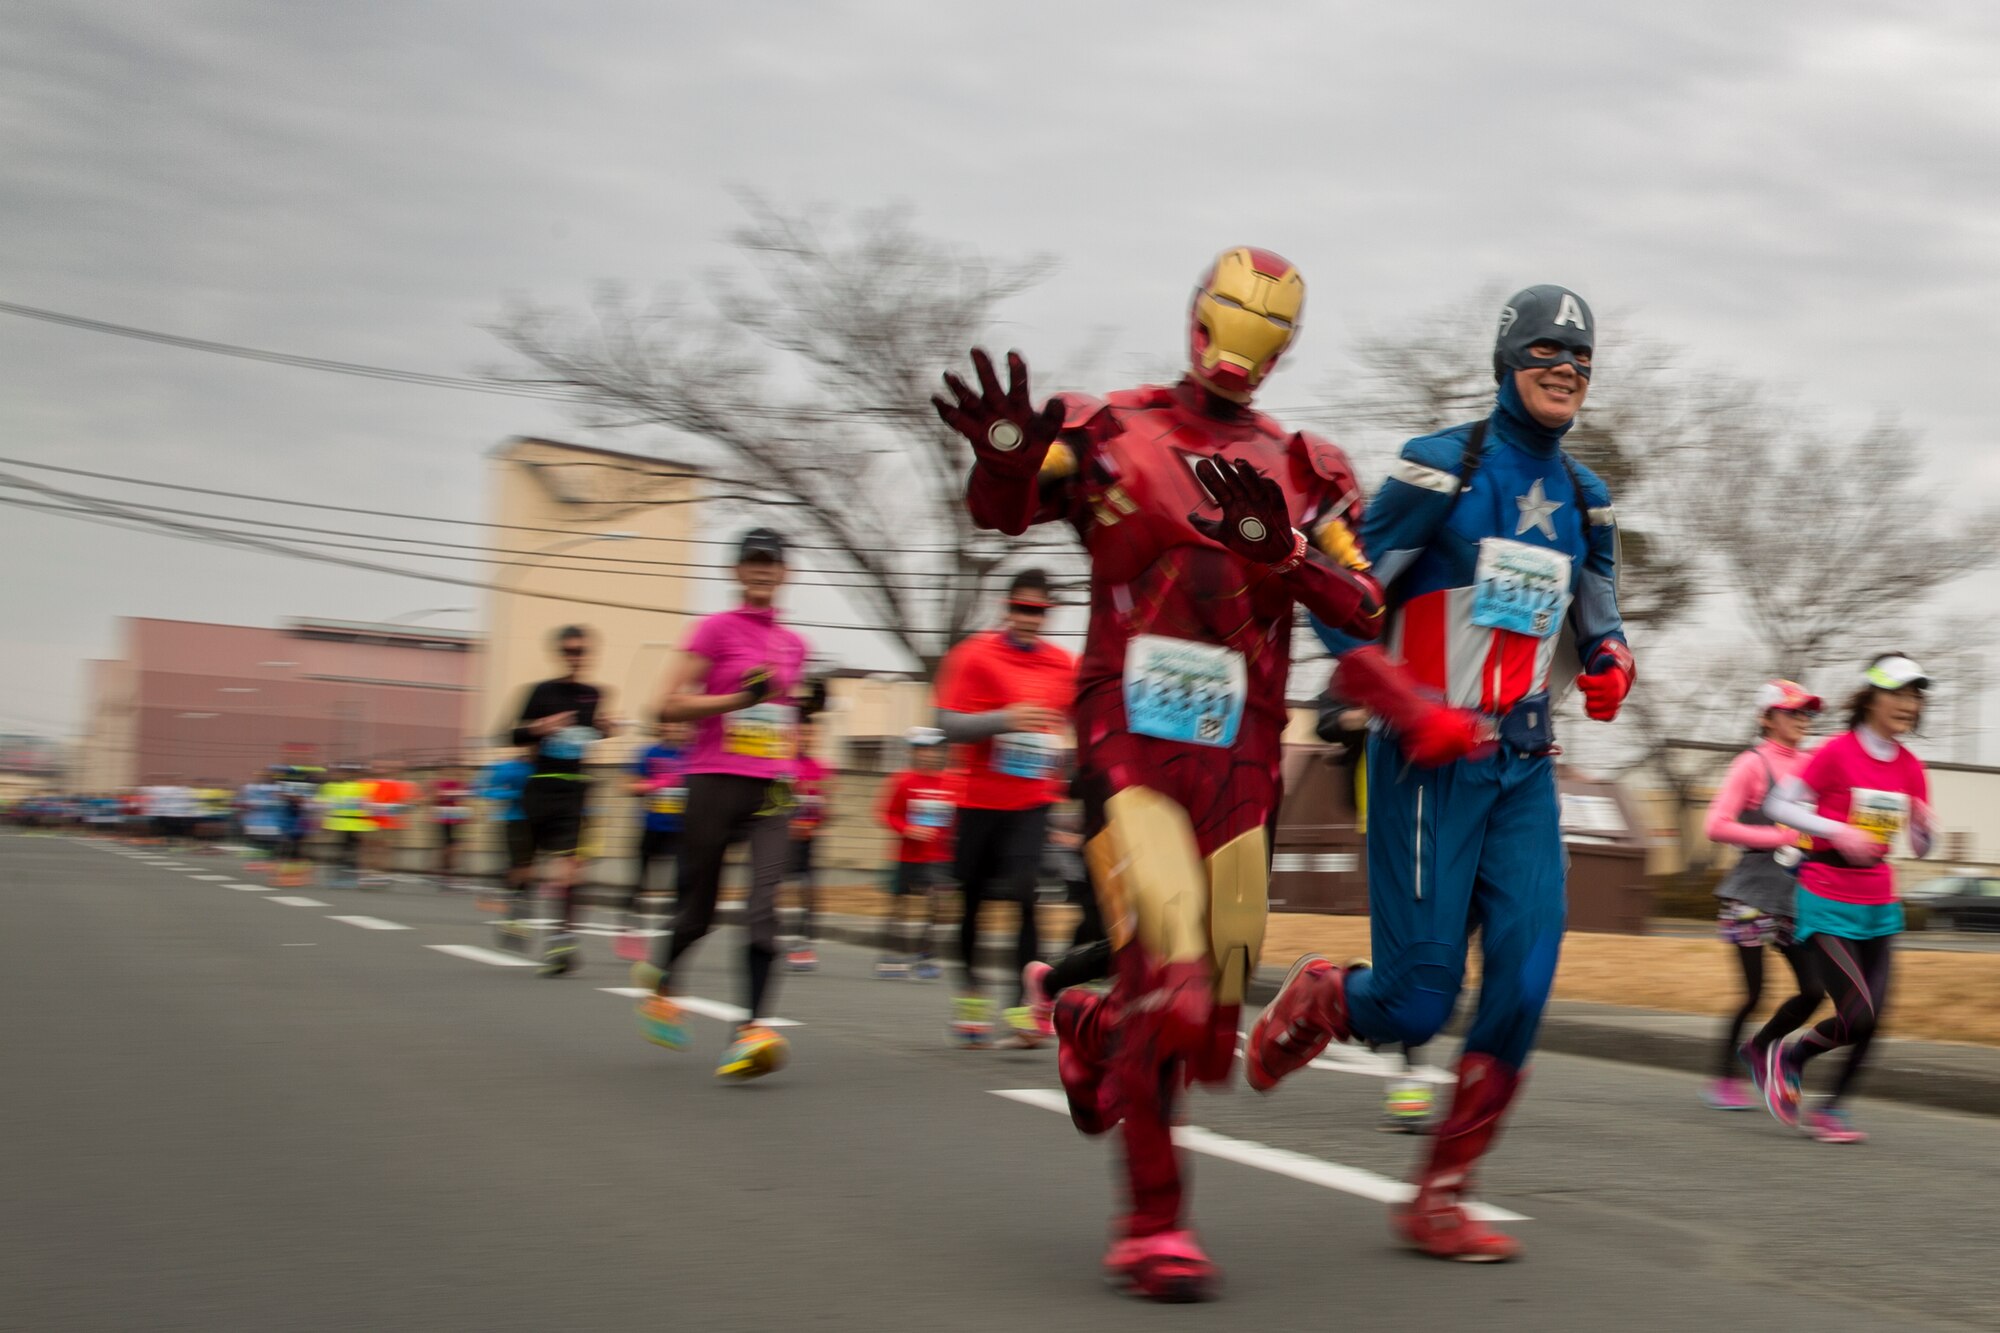 Runners dressed as Iron man and Captain America participate in the 35th Annual Frostbite Run at Yokota Air Base, Japan, Jan. 17, 2016. Some of the 9,000 runners who participated wore costumes, an established custom during the event. (U.S. Air Force photo by Osakabe Yasuo/Released)